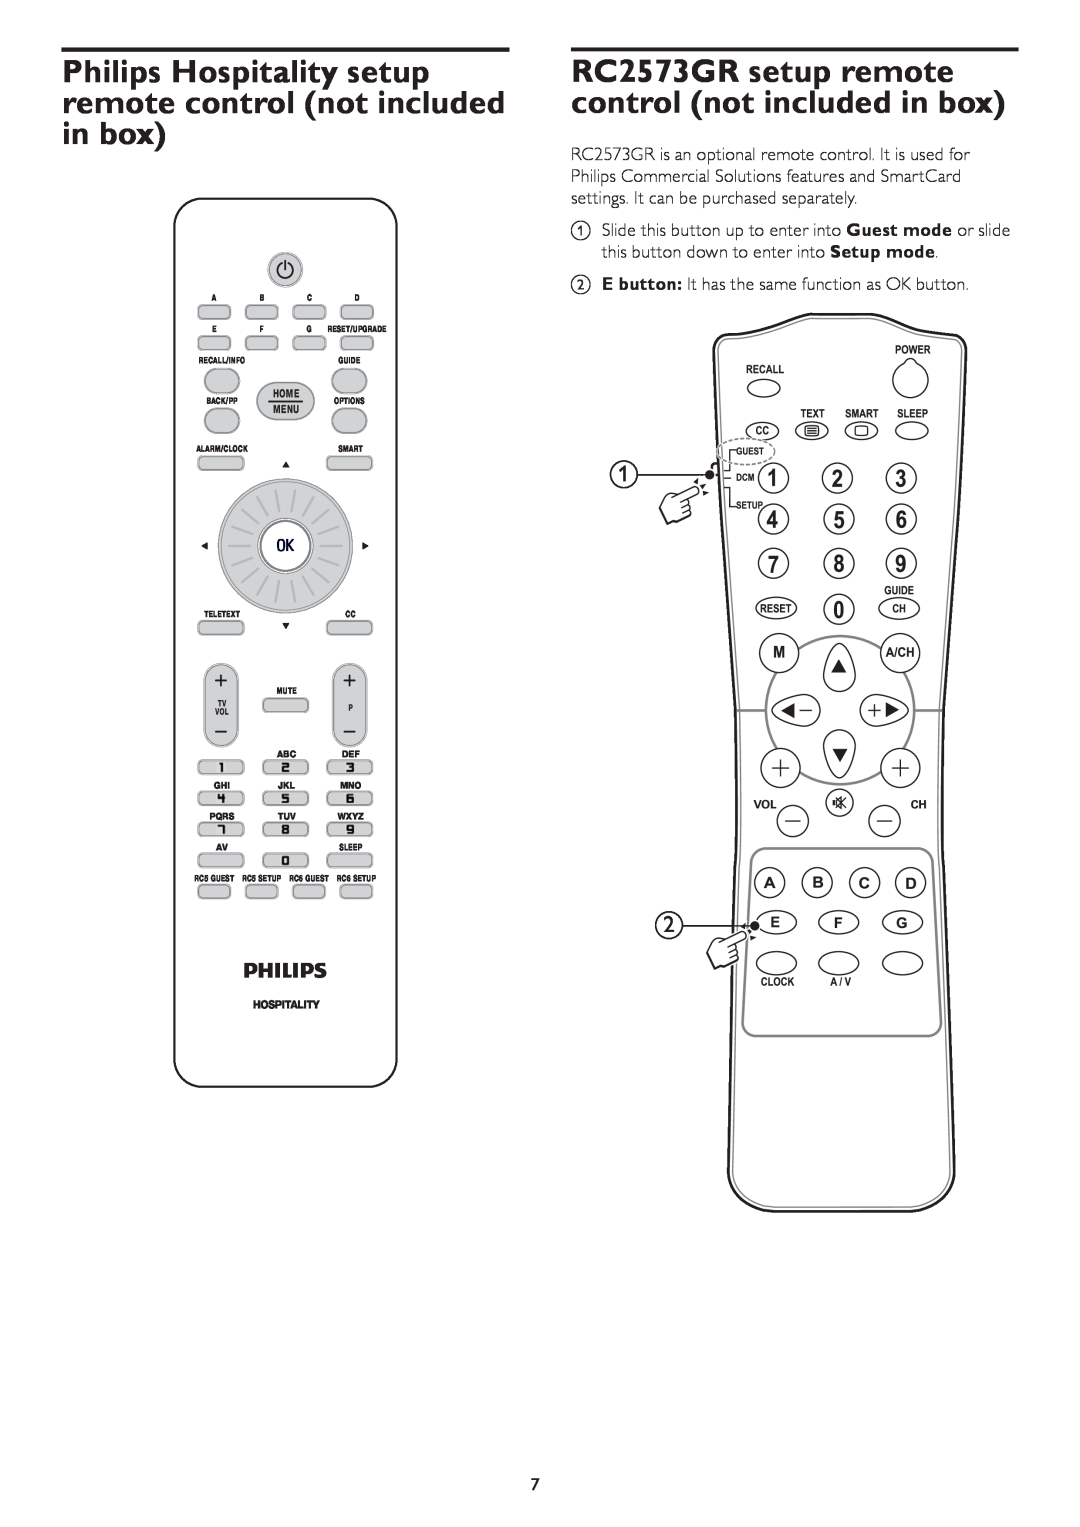 Philips 32HFL4462F Philips Hospitality setup remote control not included in box, Home, Menu, Guide, Back/Ppoptions, Mute 